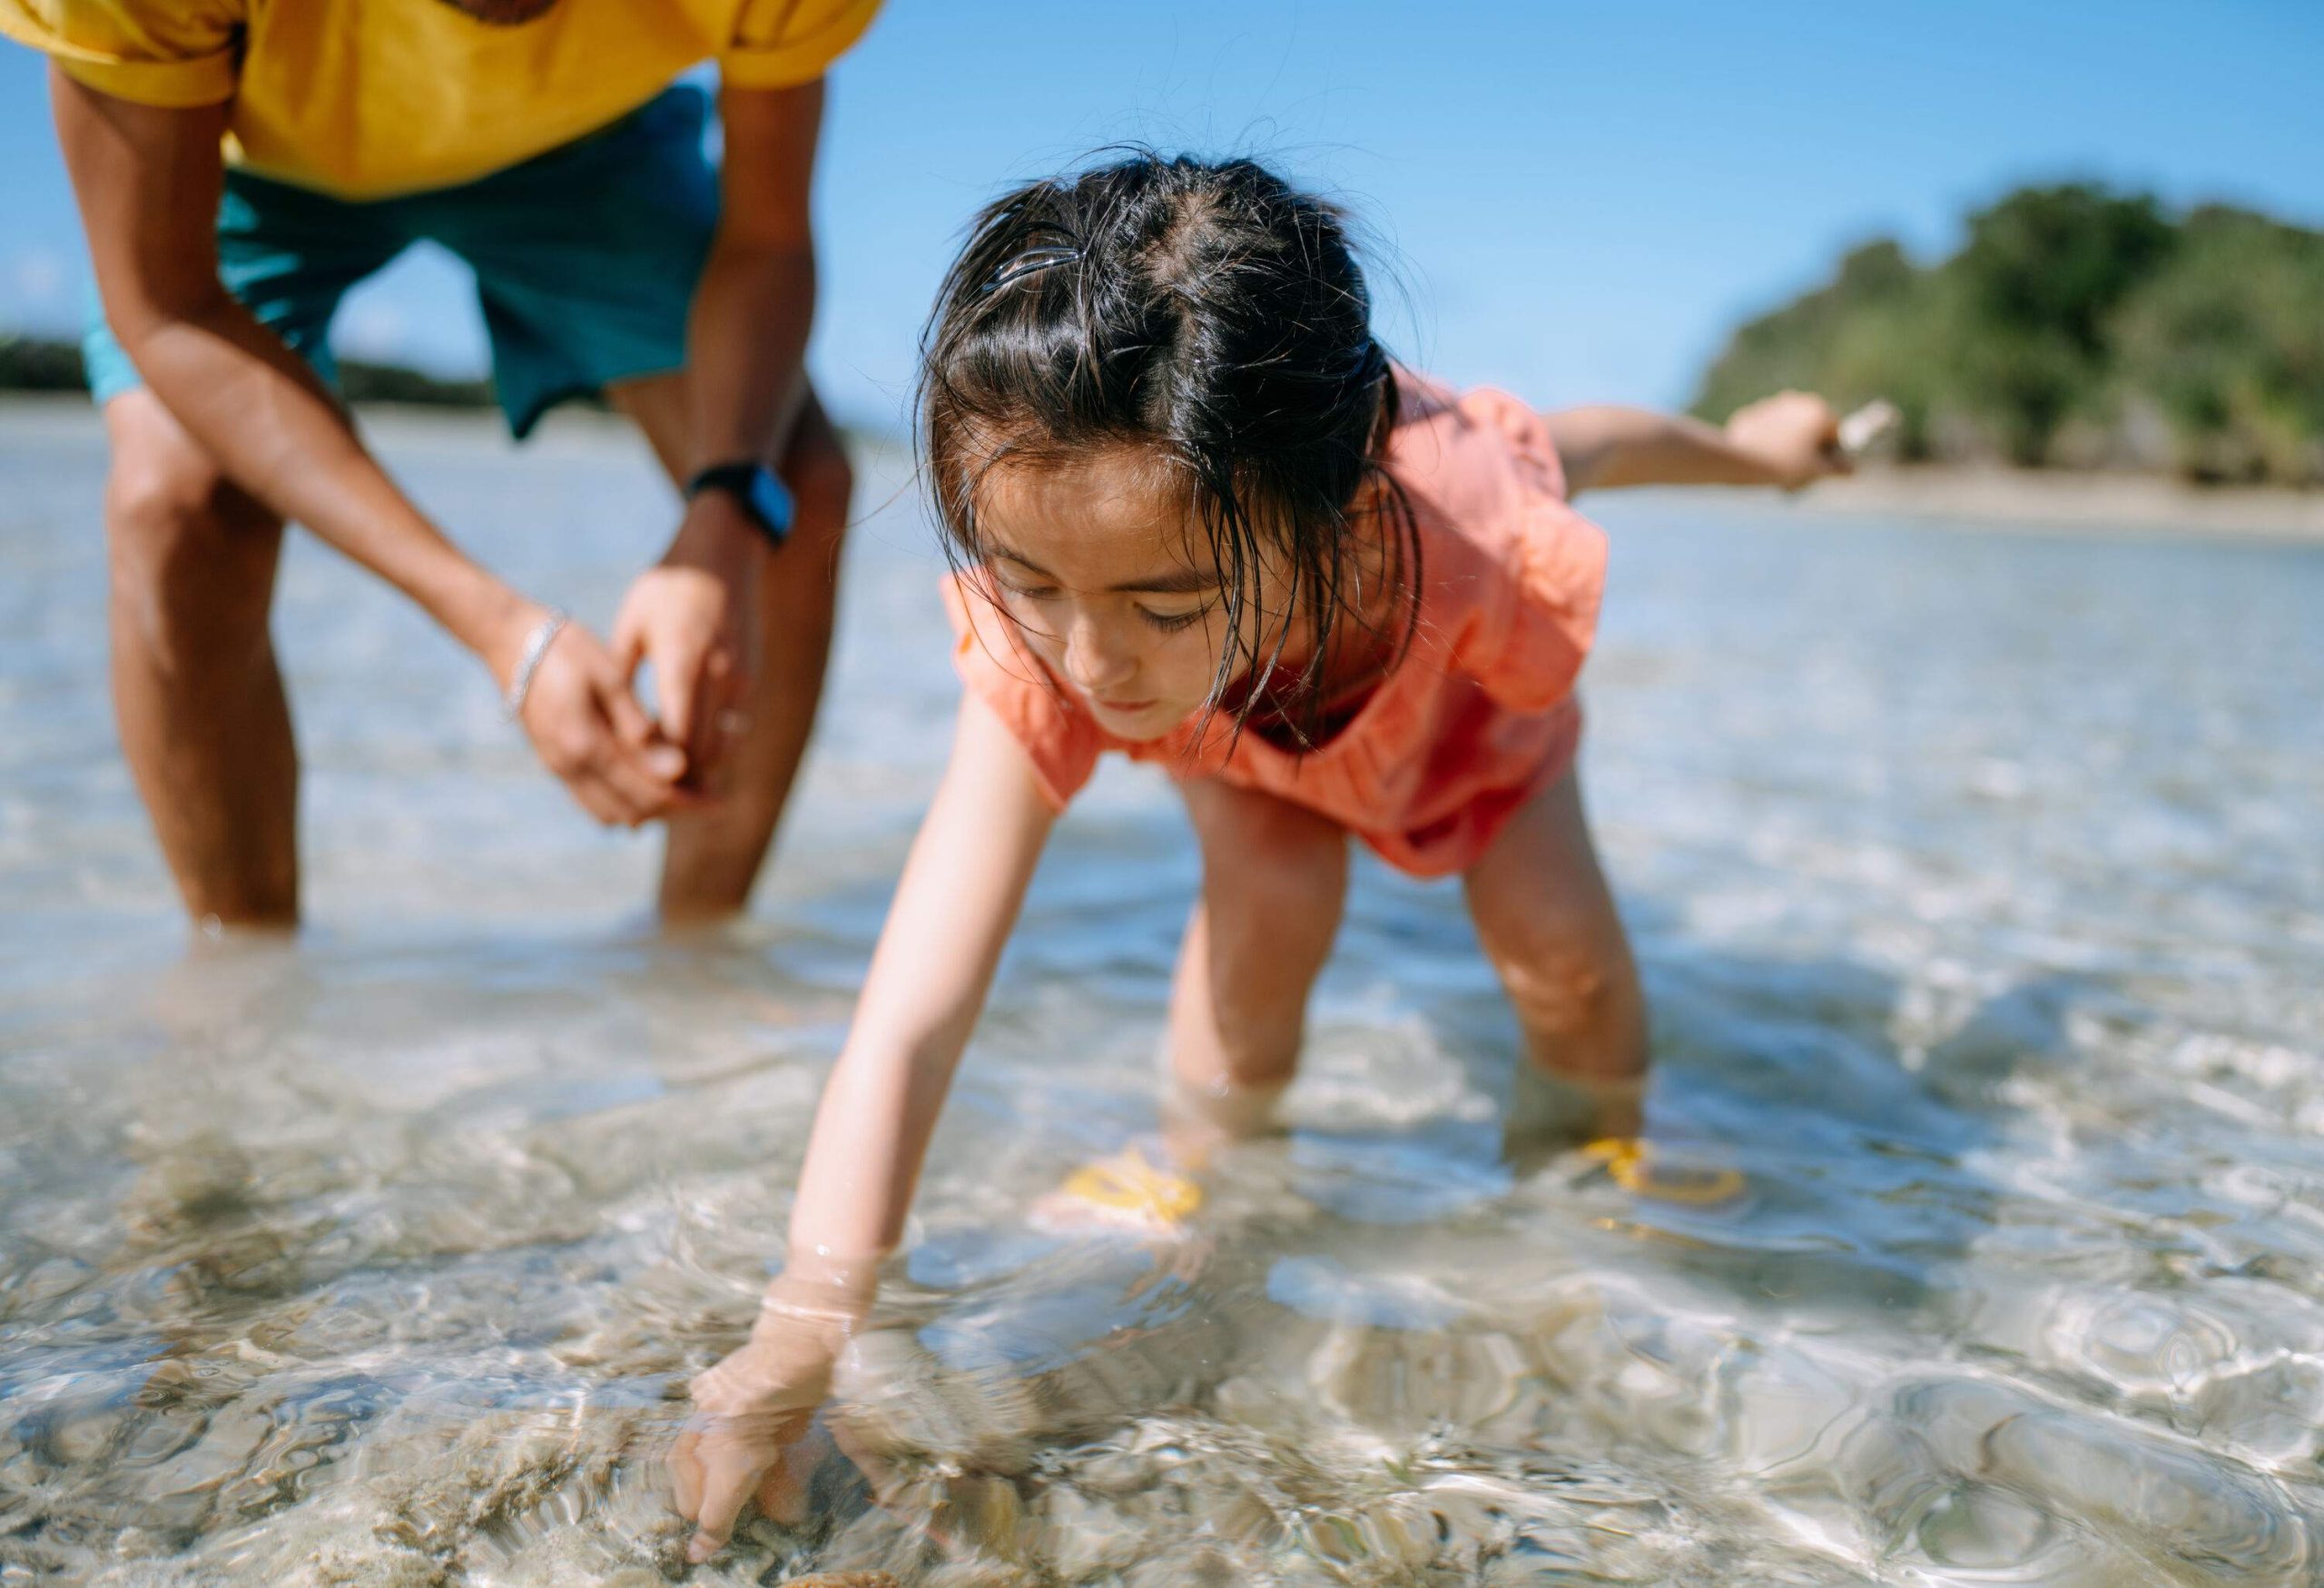 A young girl picking up shells in the shallows of the sea with her father close behind.